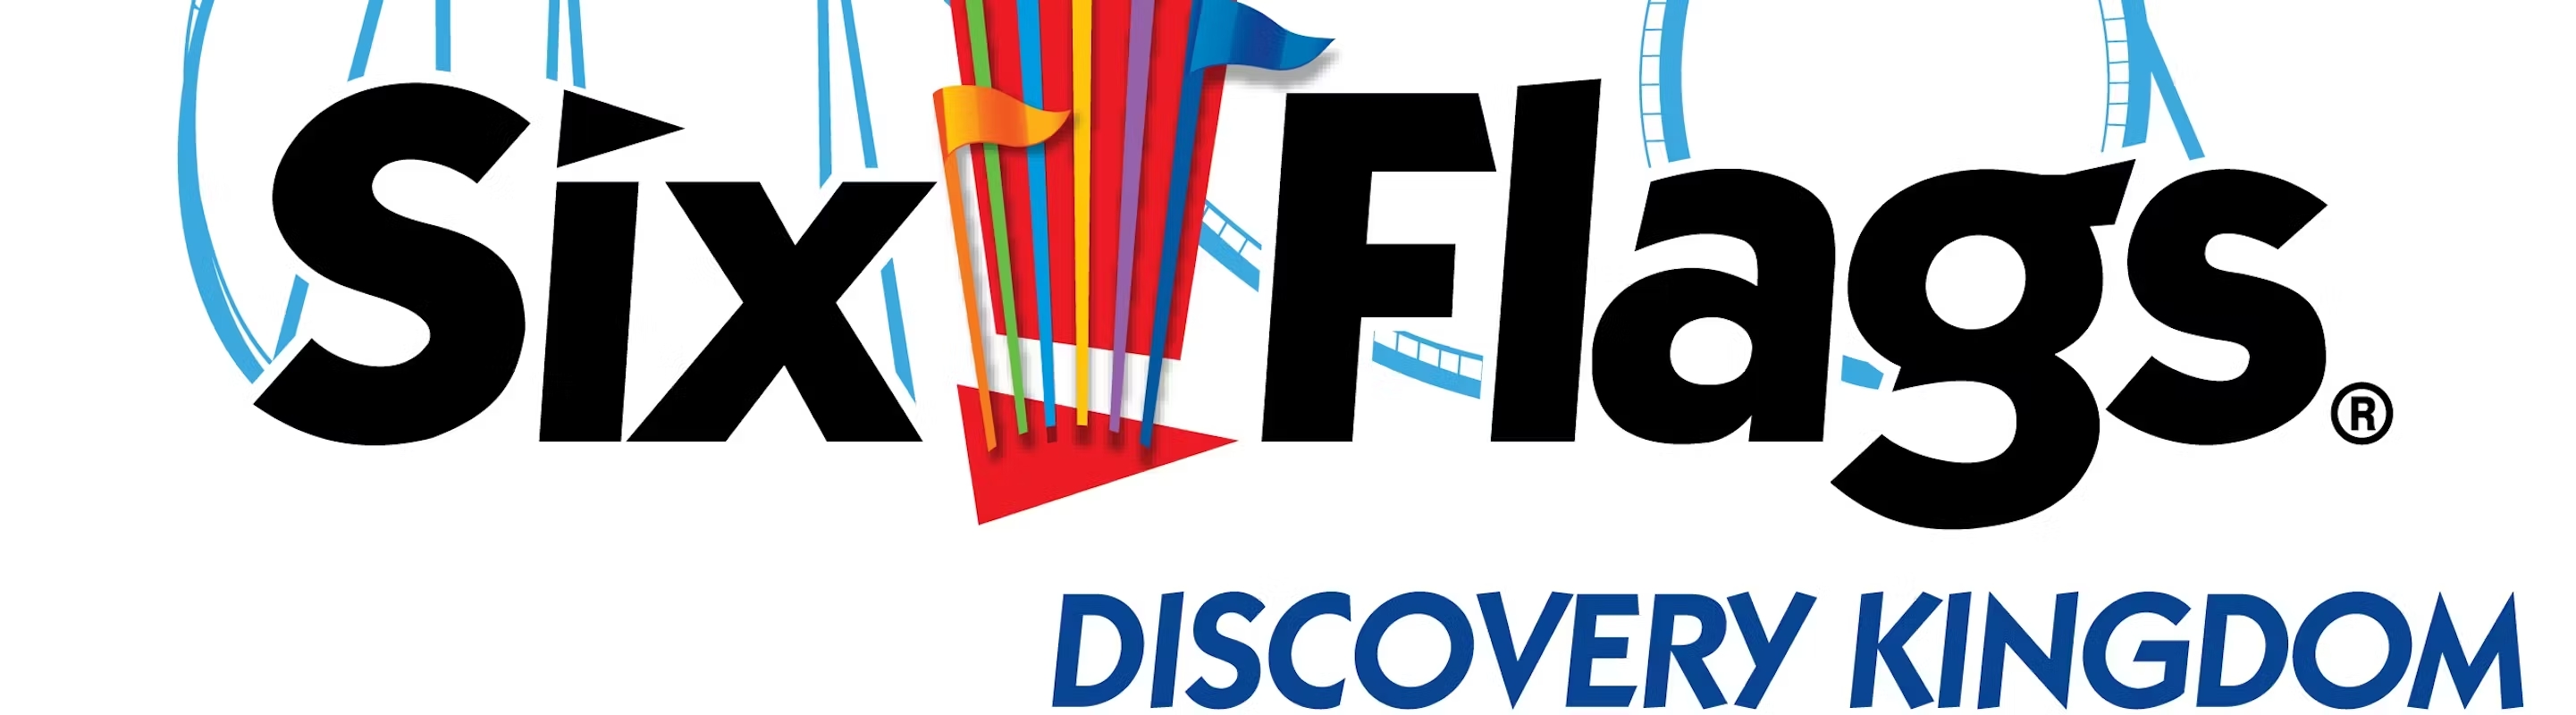 Six Flags Discovery Kingdom Admission Tickets